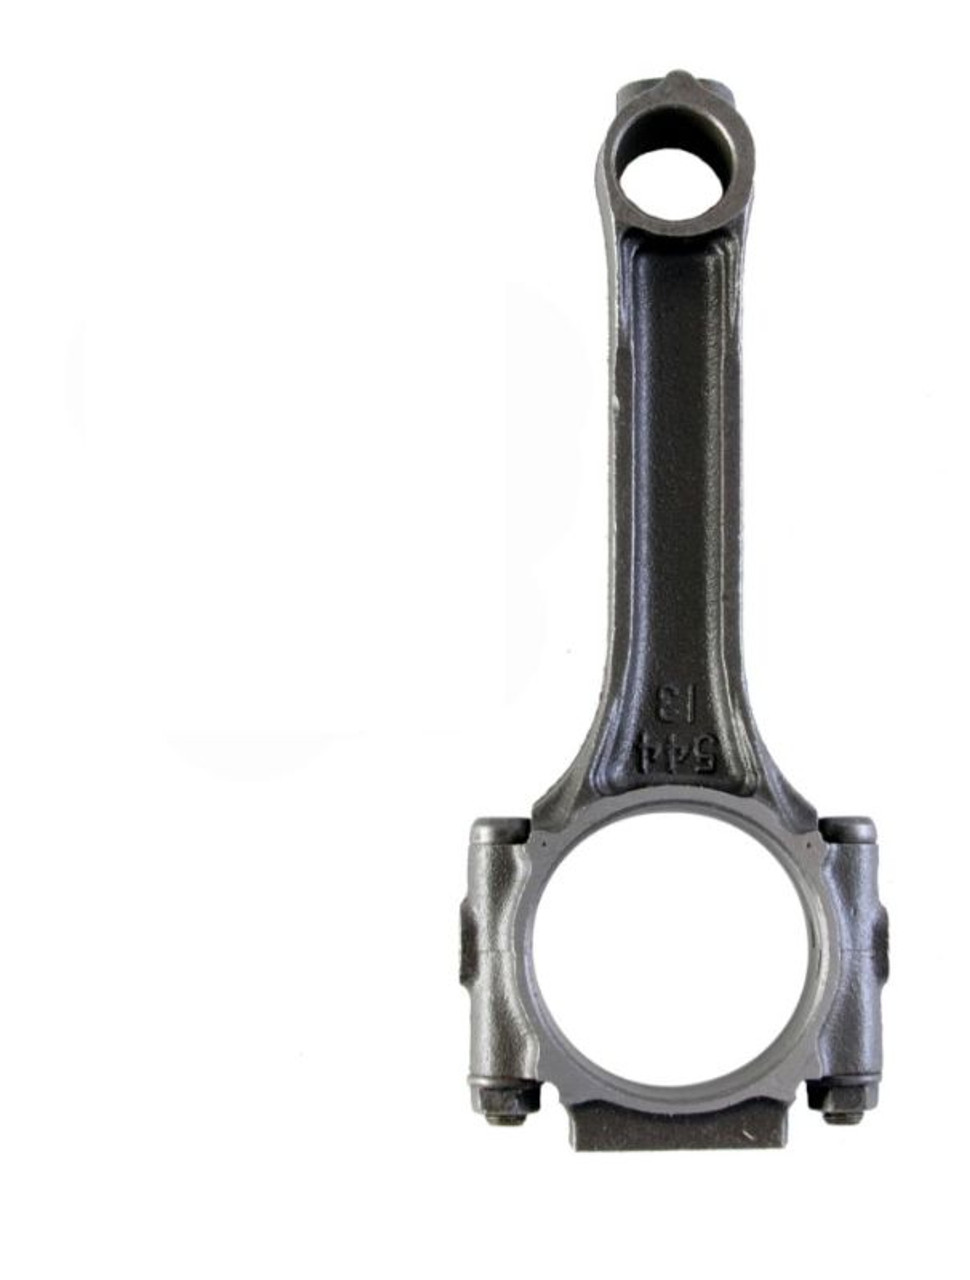 Connecting Rod - 1990 Jeep Wagoneer 4.0L (ECR108.E42)